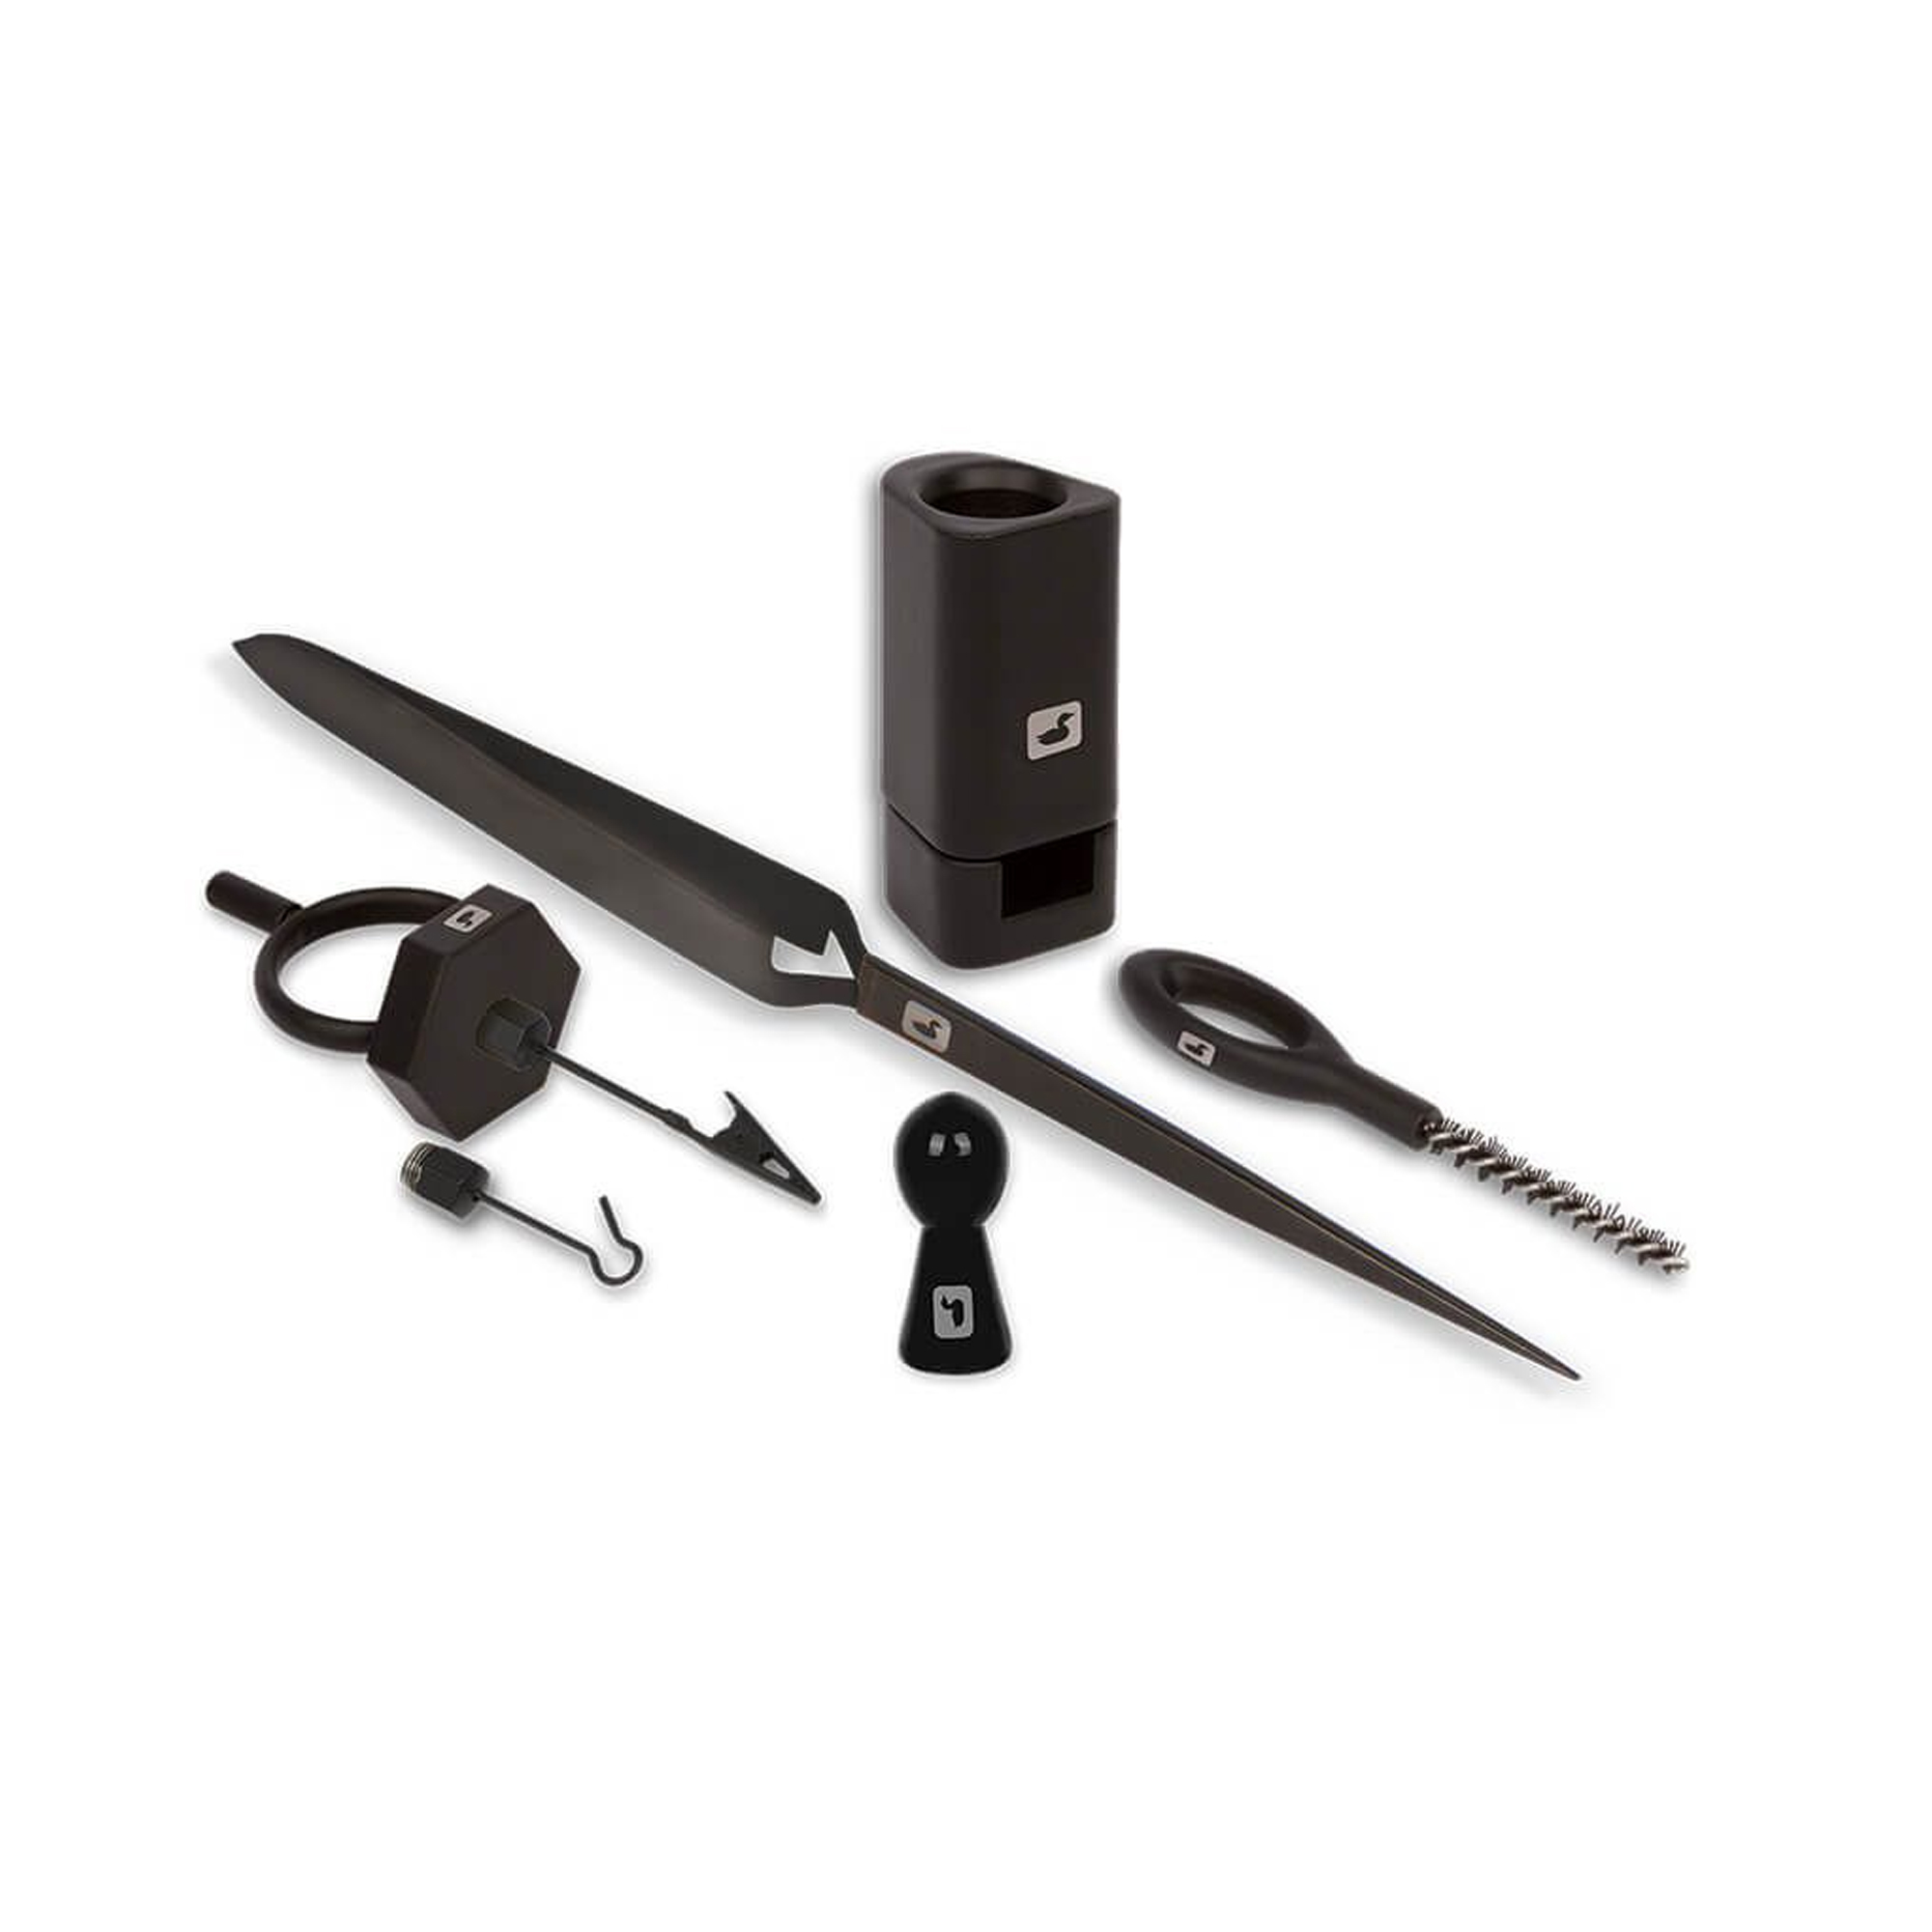 Loon Accessory Fly Tying Tool Kit – Guide Flyfishing